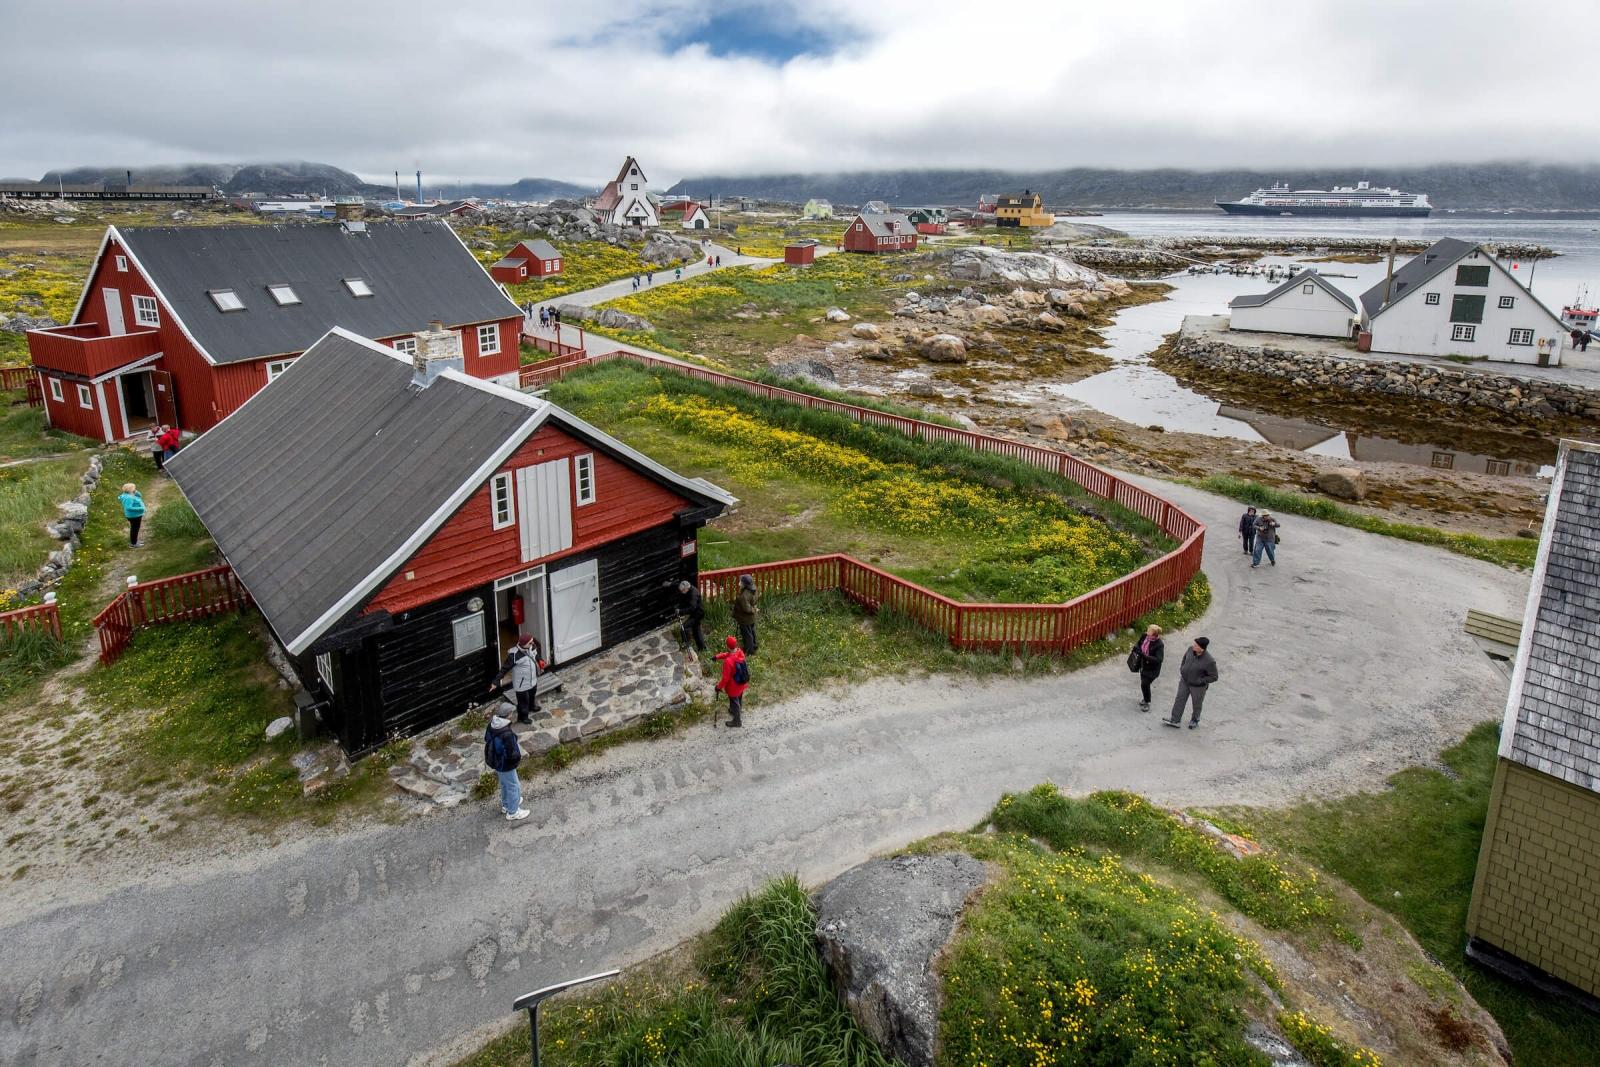 Cruise guests from the ship Rotterdam visiting the old museum area of Nanortalik on South Greenland. Photo by Mads Pihl.